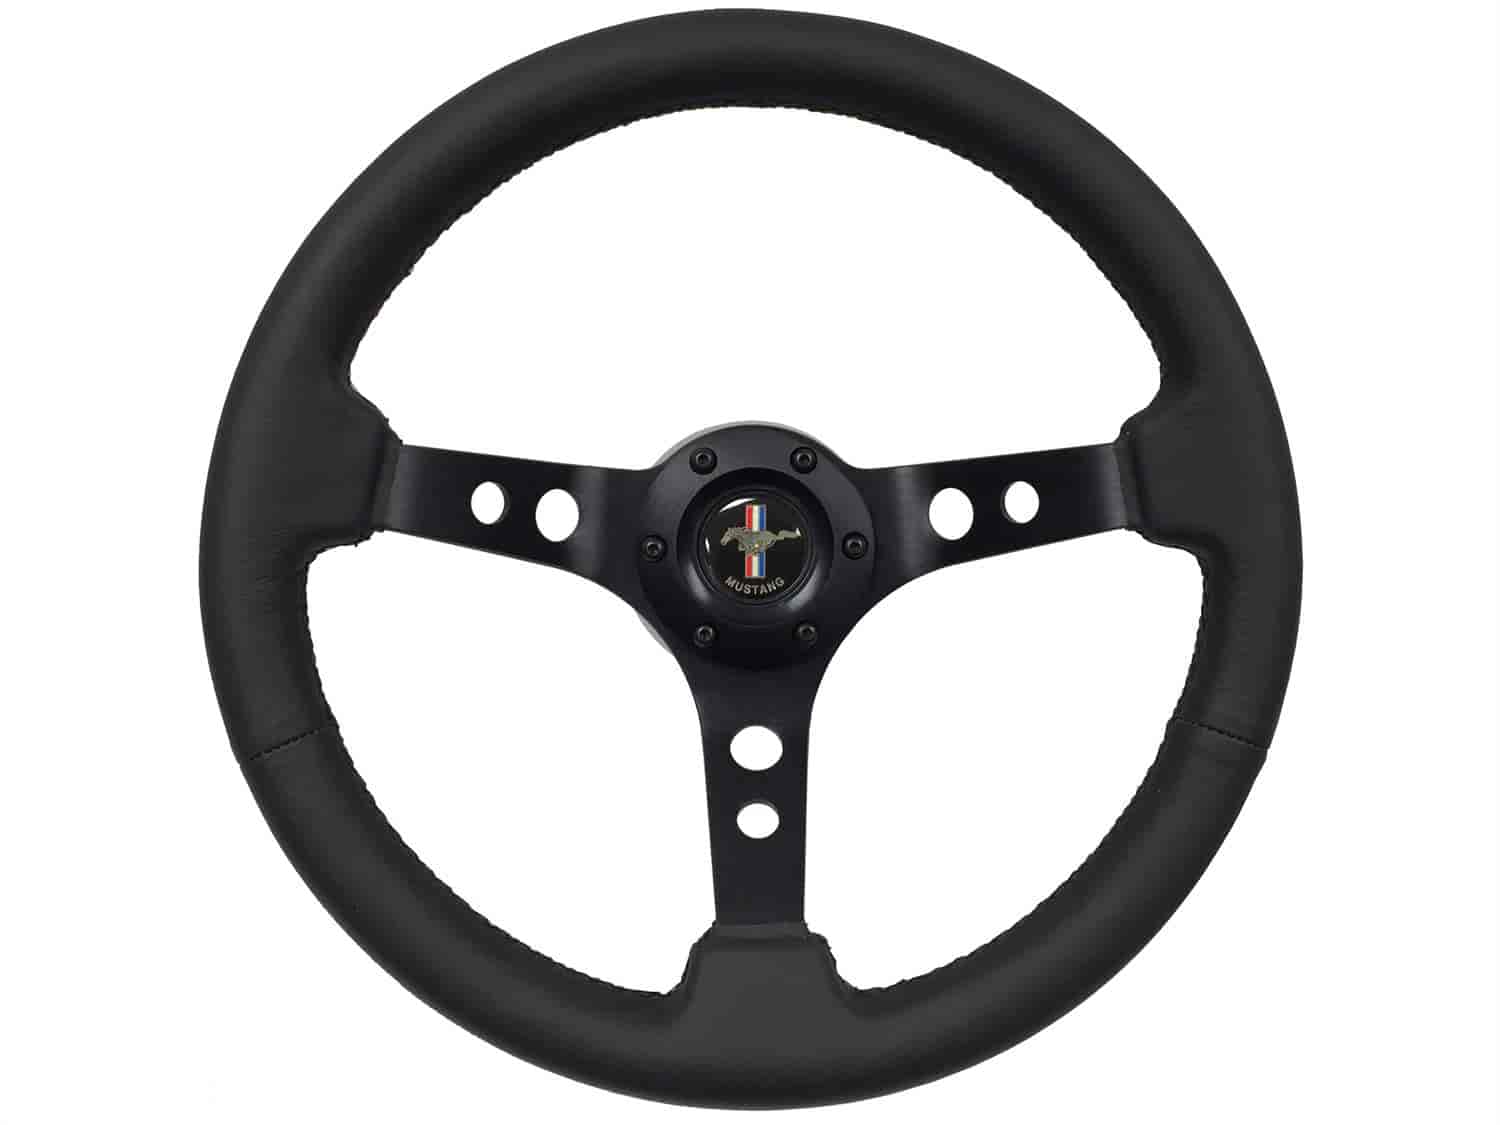 S6 Sport Steering Wheel Kit for 1984-2004 Ford Mustang, 14 in. Diameter, Black Leather Grip, with 6-Bolt Adapter and Horn Button